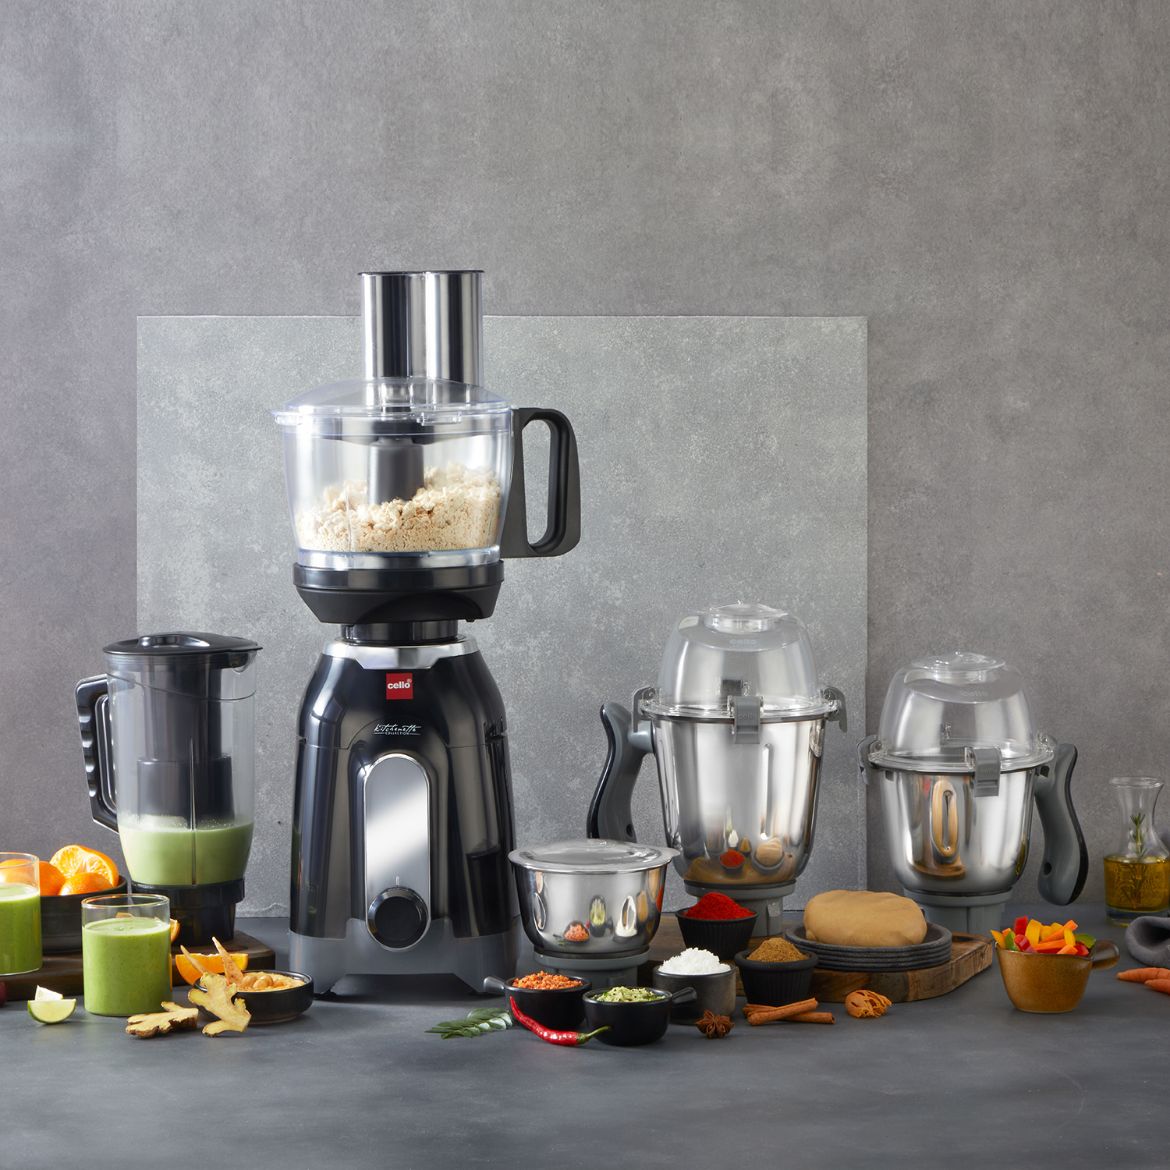 Discovery Chef Juicer Mixer Grinder with 5 Jars, 750W Black / 750 Watts